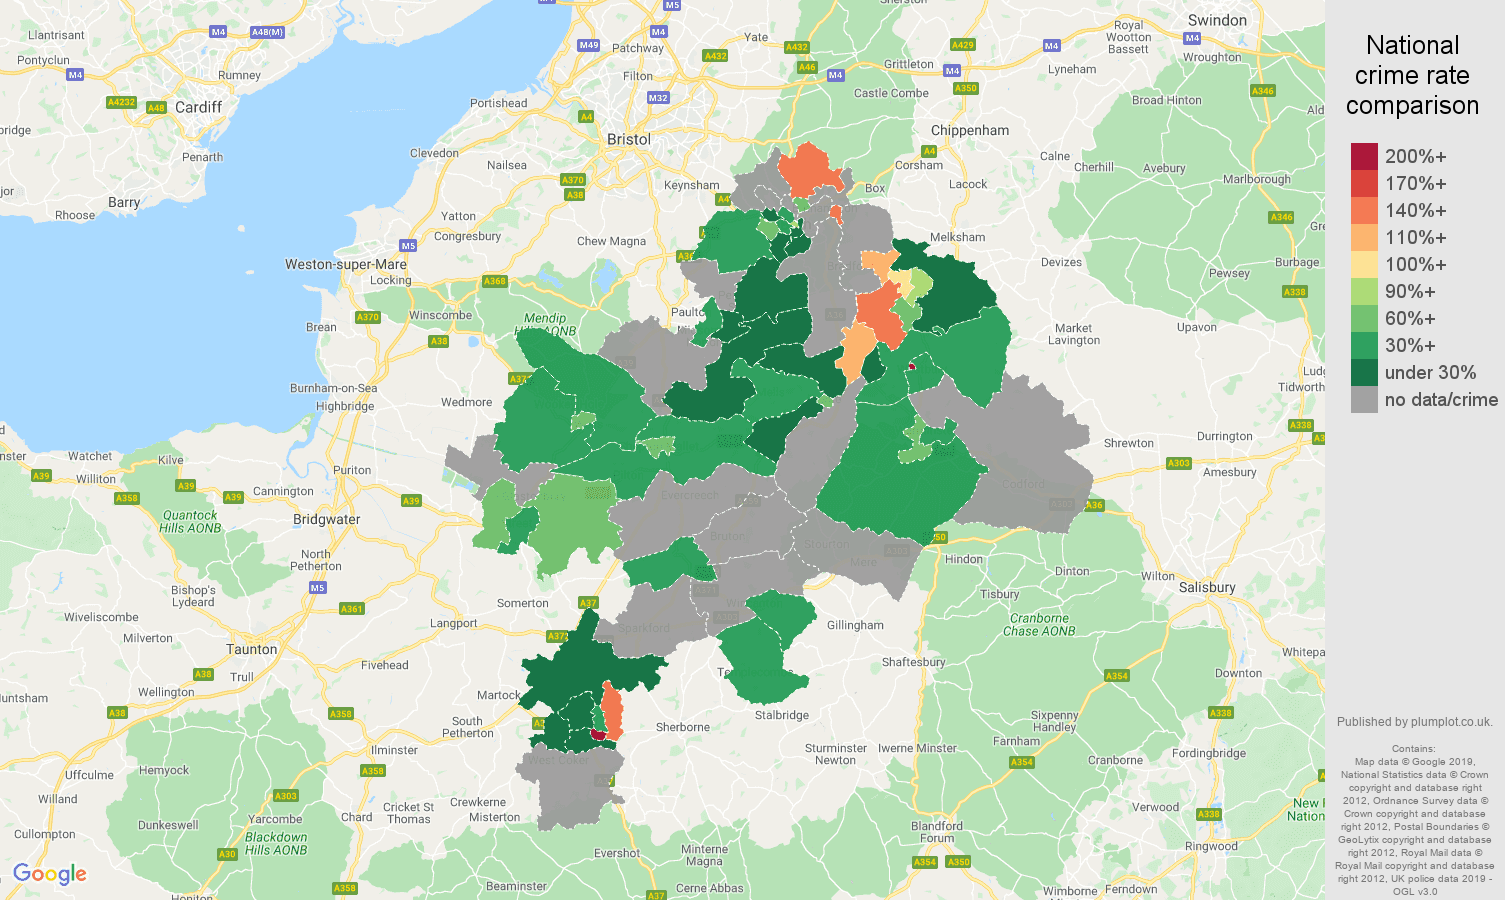 Bath possession of weapons crime rate comparison map